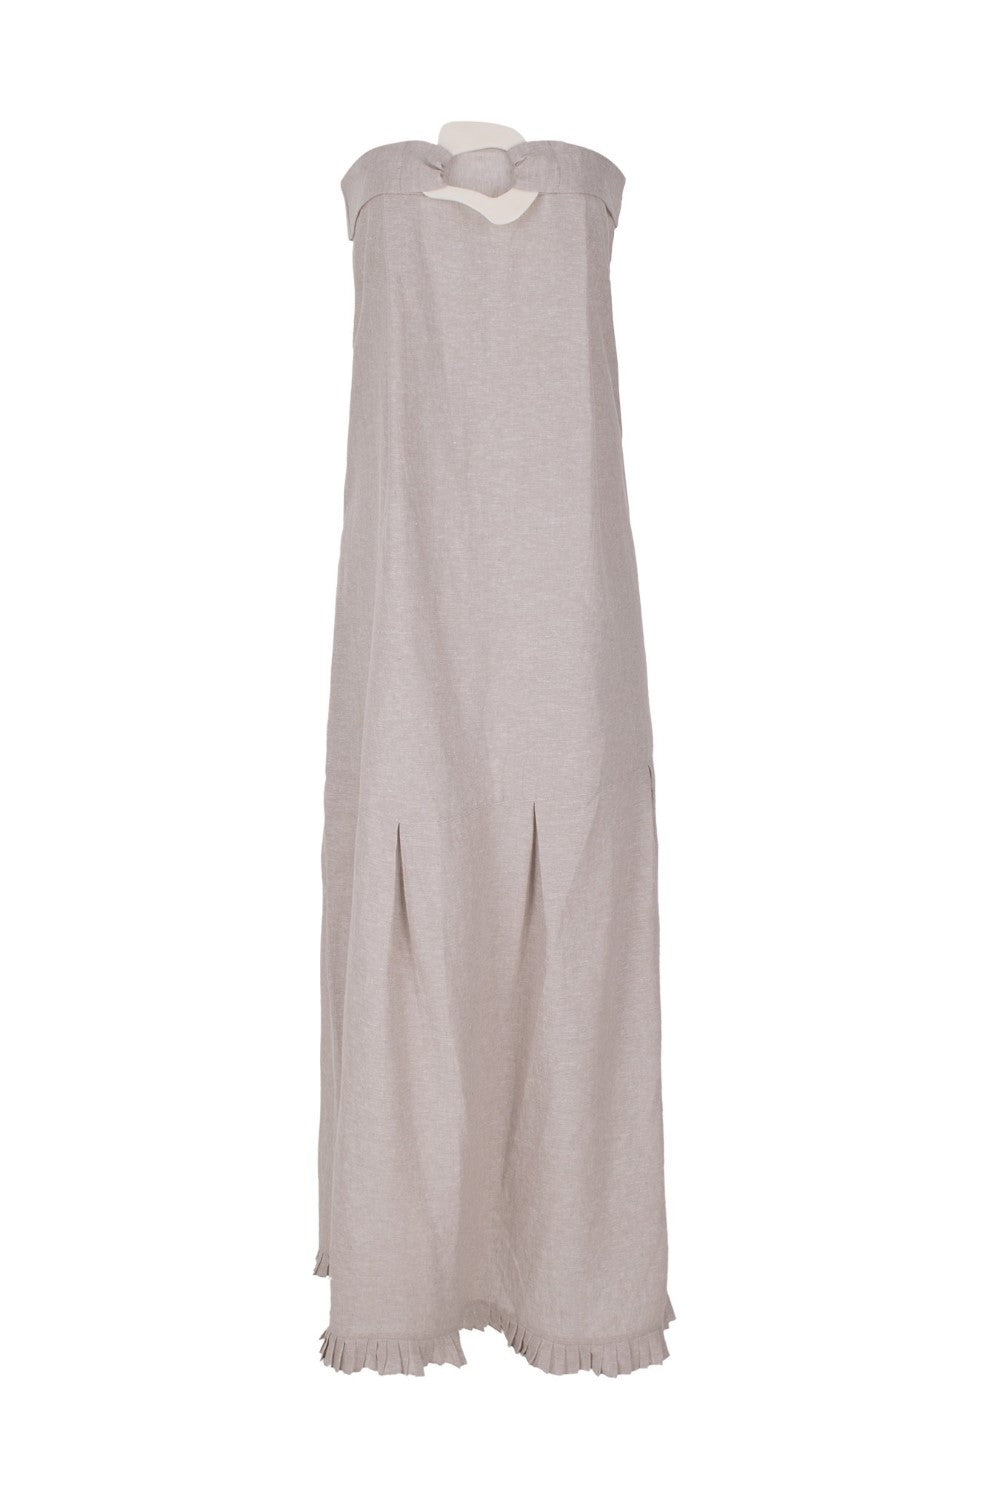 Look for lightweight linen-blend pieces like this strapless and elegant easy-chic dress for balmy evenings